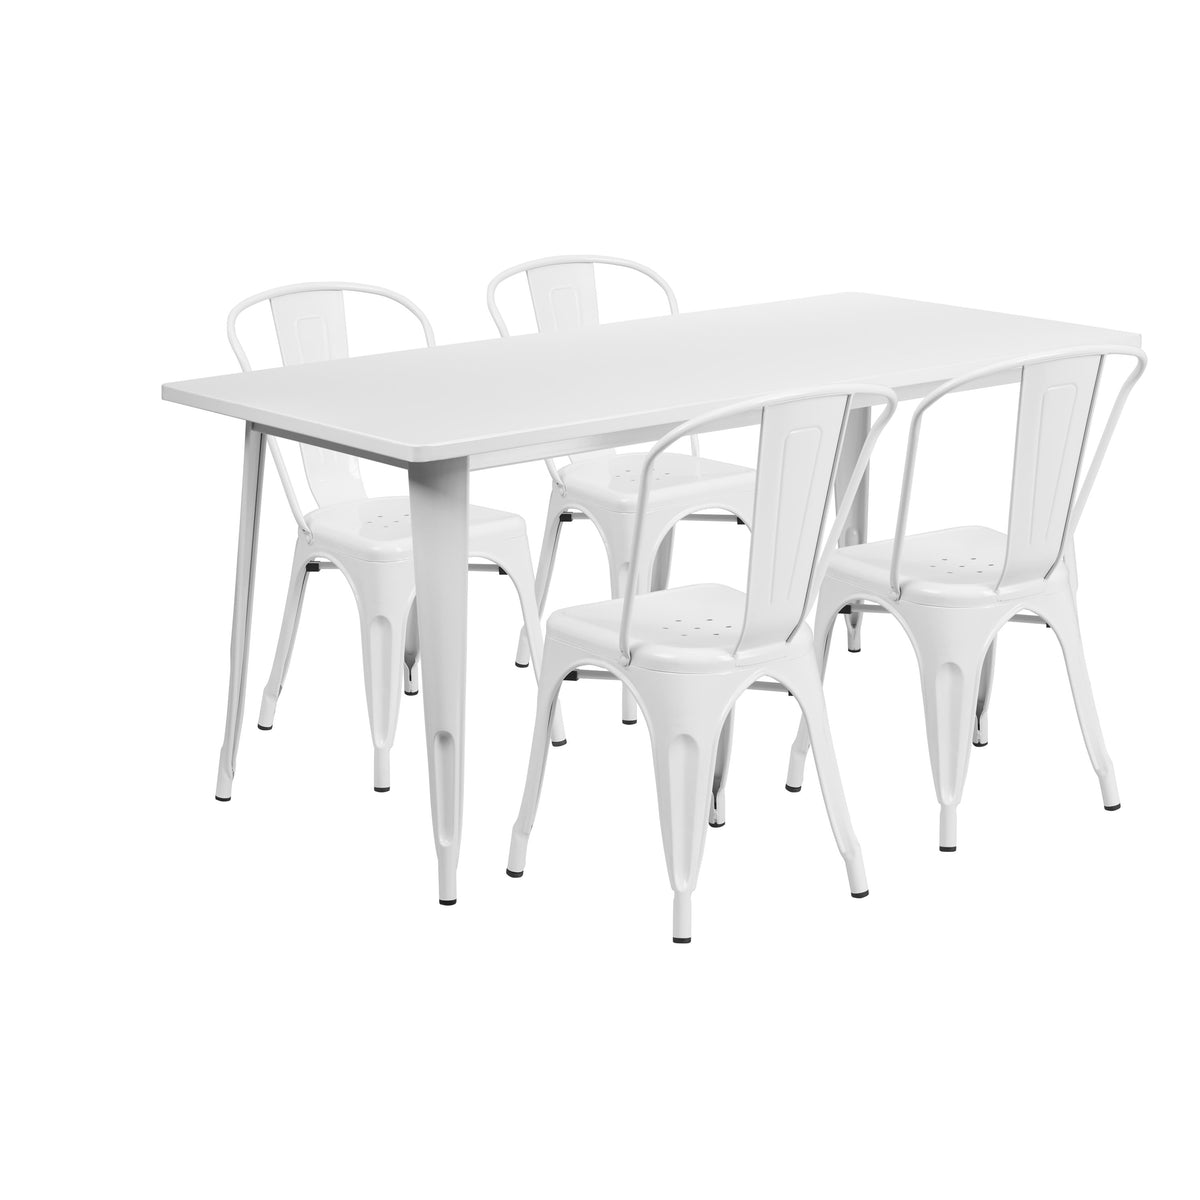 White |#| 31.5inch x 63inch Rectangular White Metal Indoor-Outdoor Table Set w/ 4 Stack Chairs